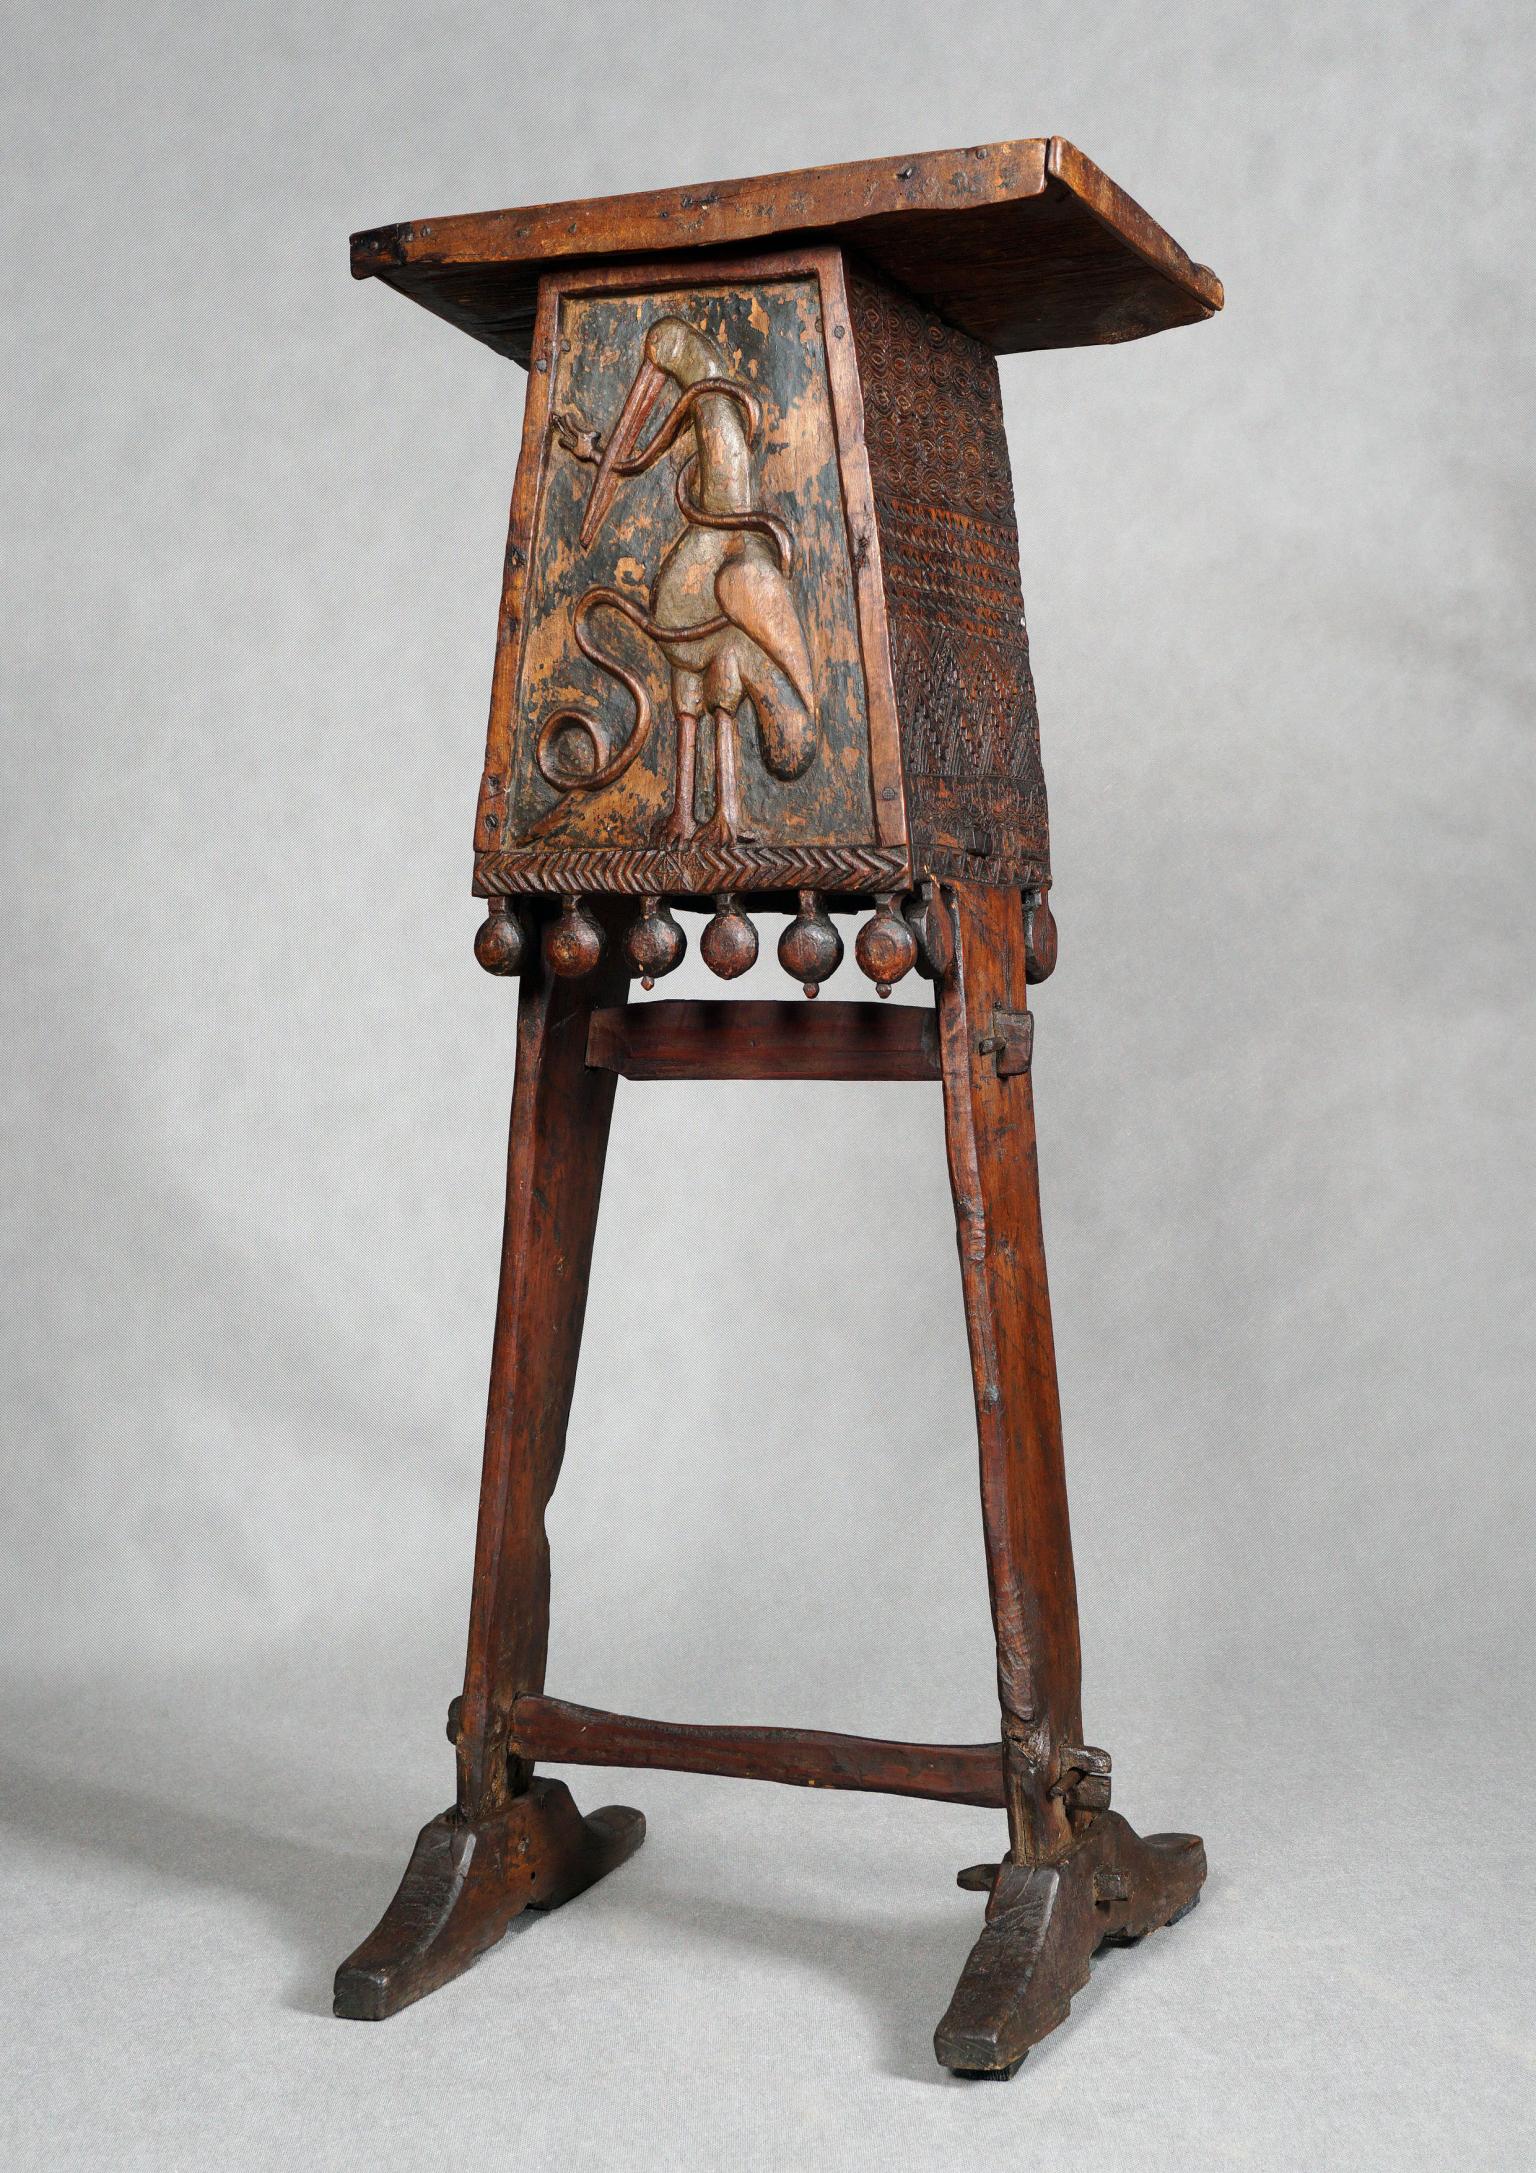 Wooden lectern with stork carving.